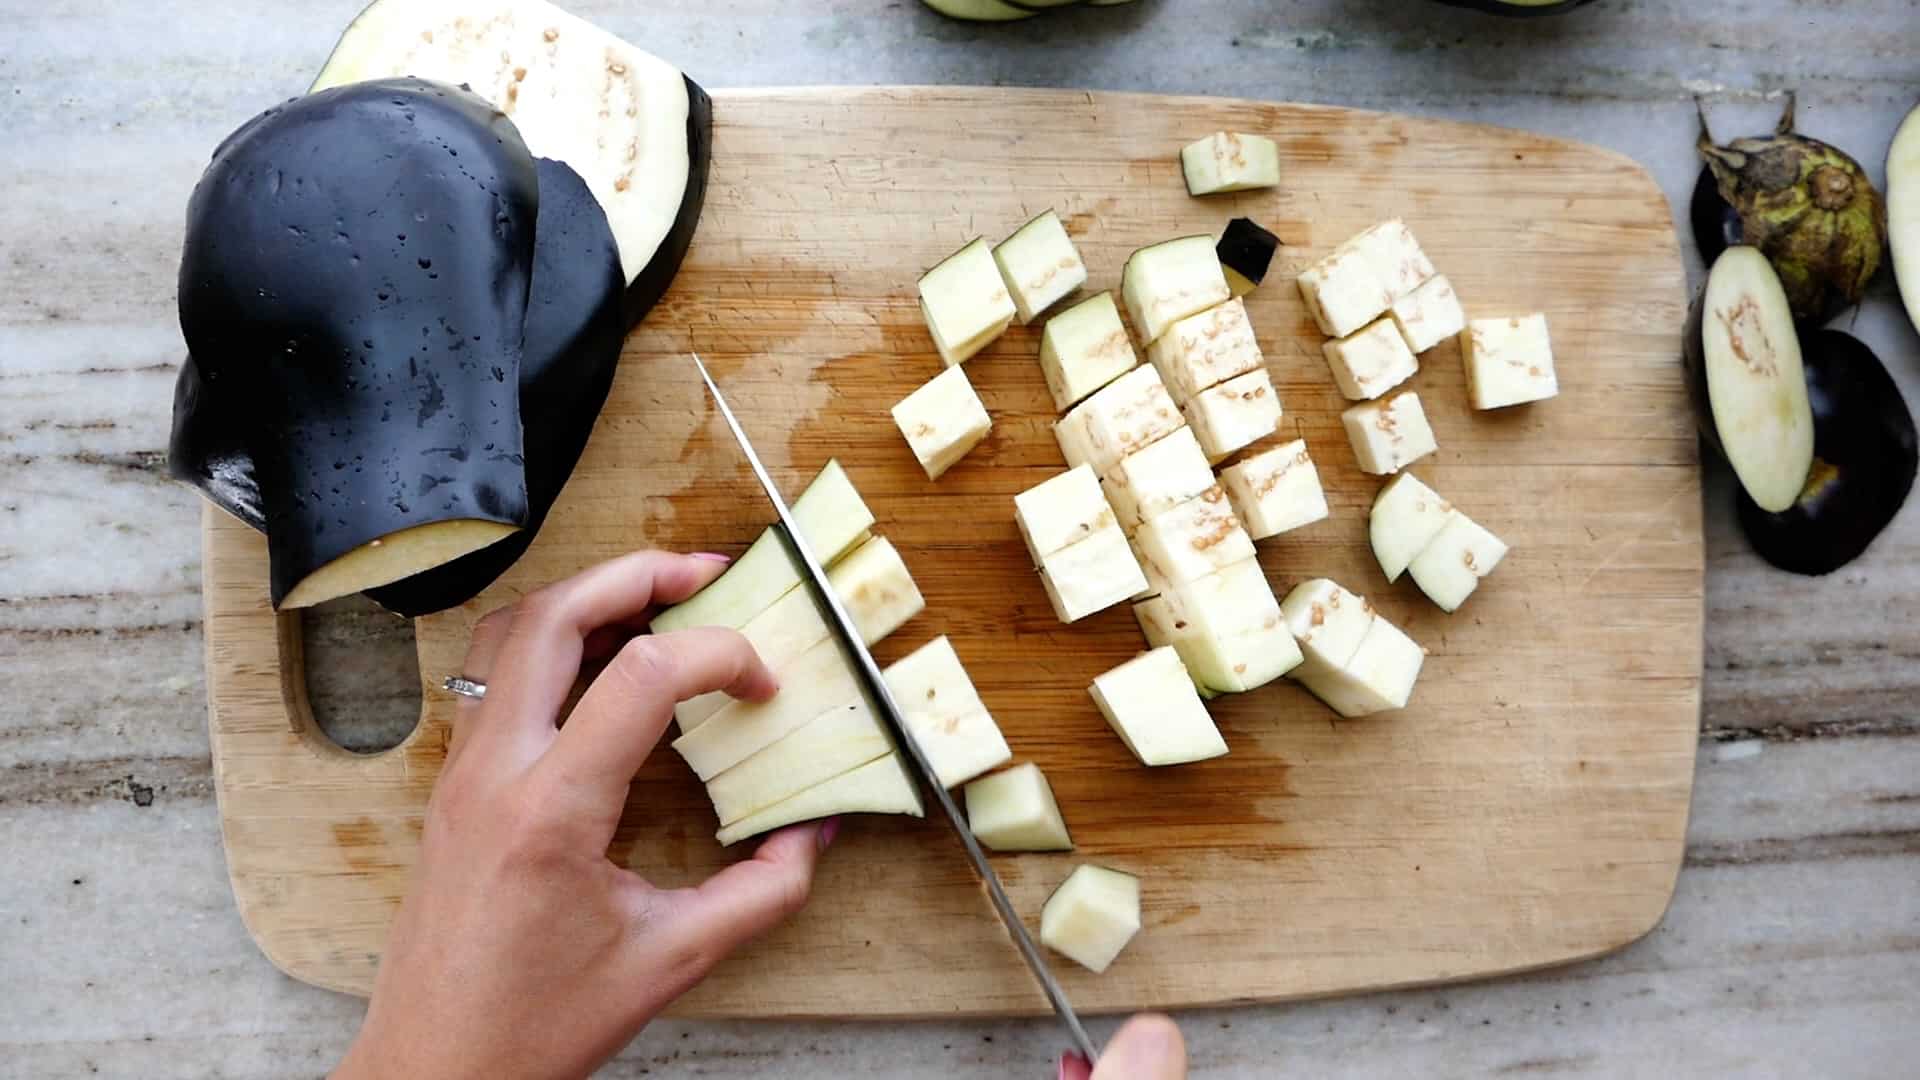 woman cutting an eggplant into cubes over a bamboo cutting board